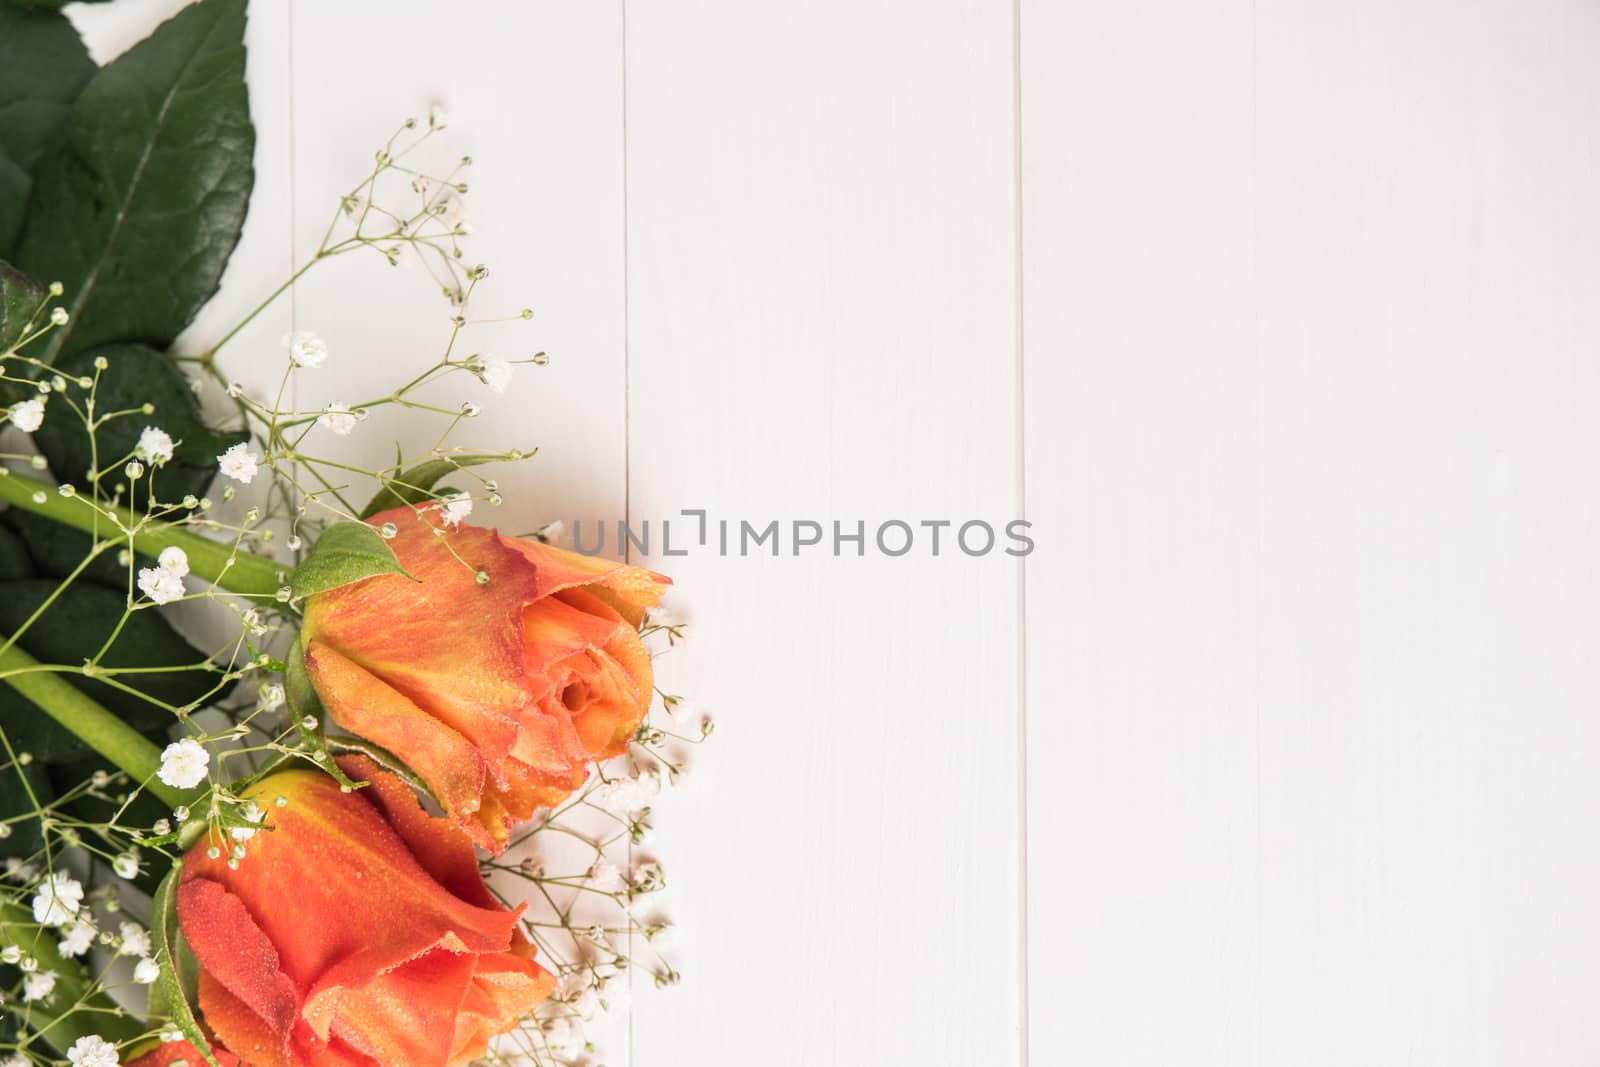 A bouquet of orange roses and gypsophila on wooden table. Copy space